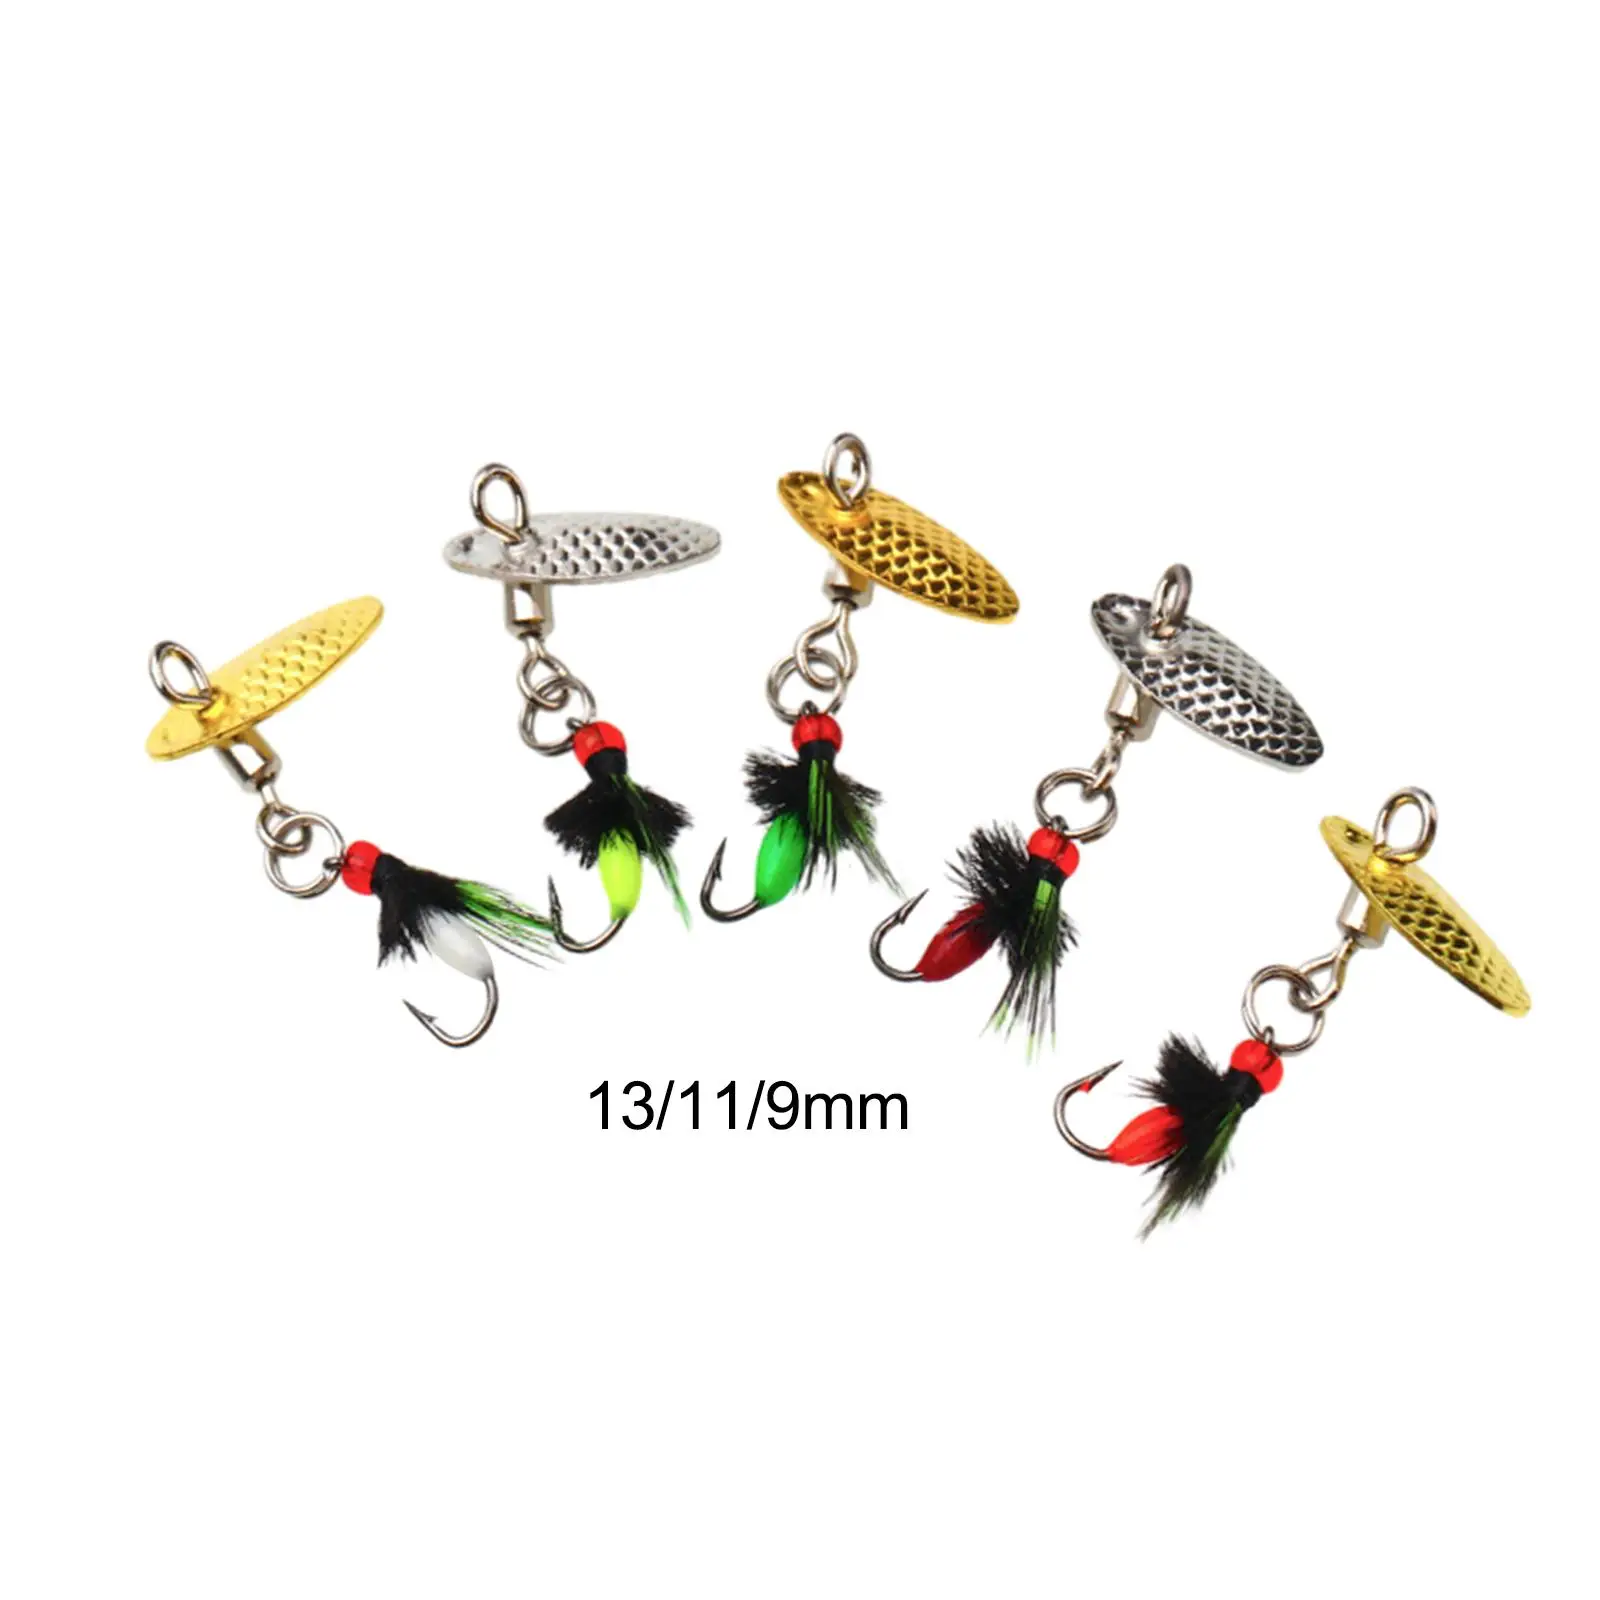 5Pcs Fishing Lures Spinnerbait Fishing Tackle with Box Assorted Trout Lures Bass Fishing Lures Set for Bass Pike Trout Salmon